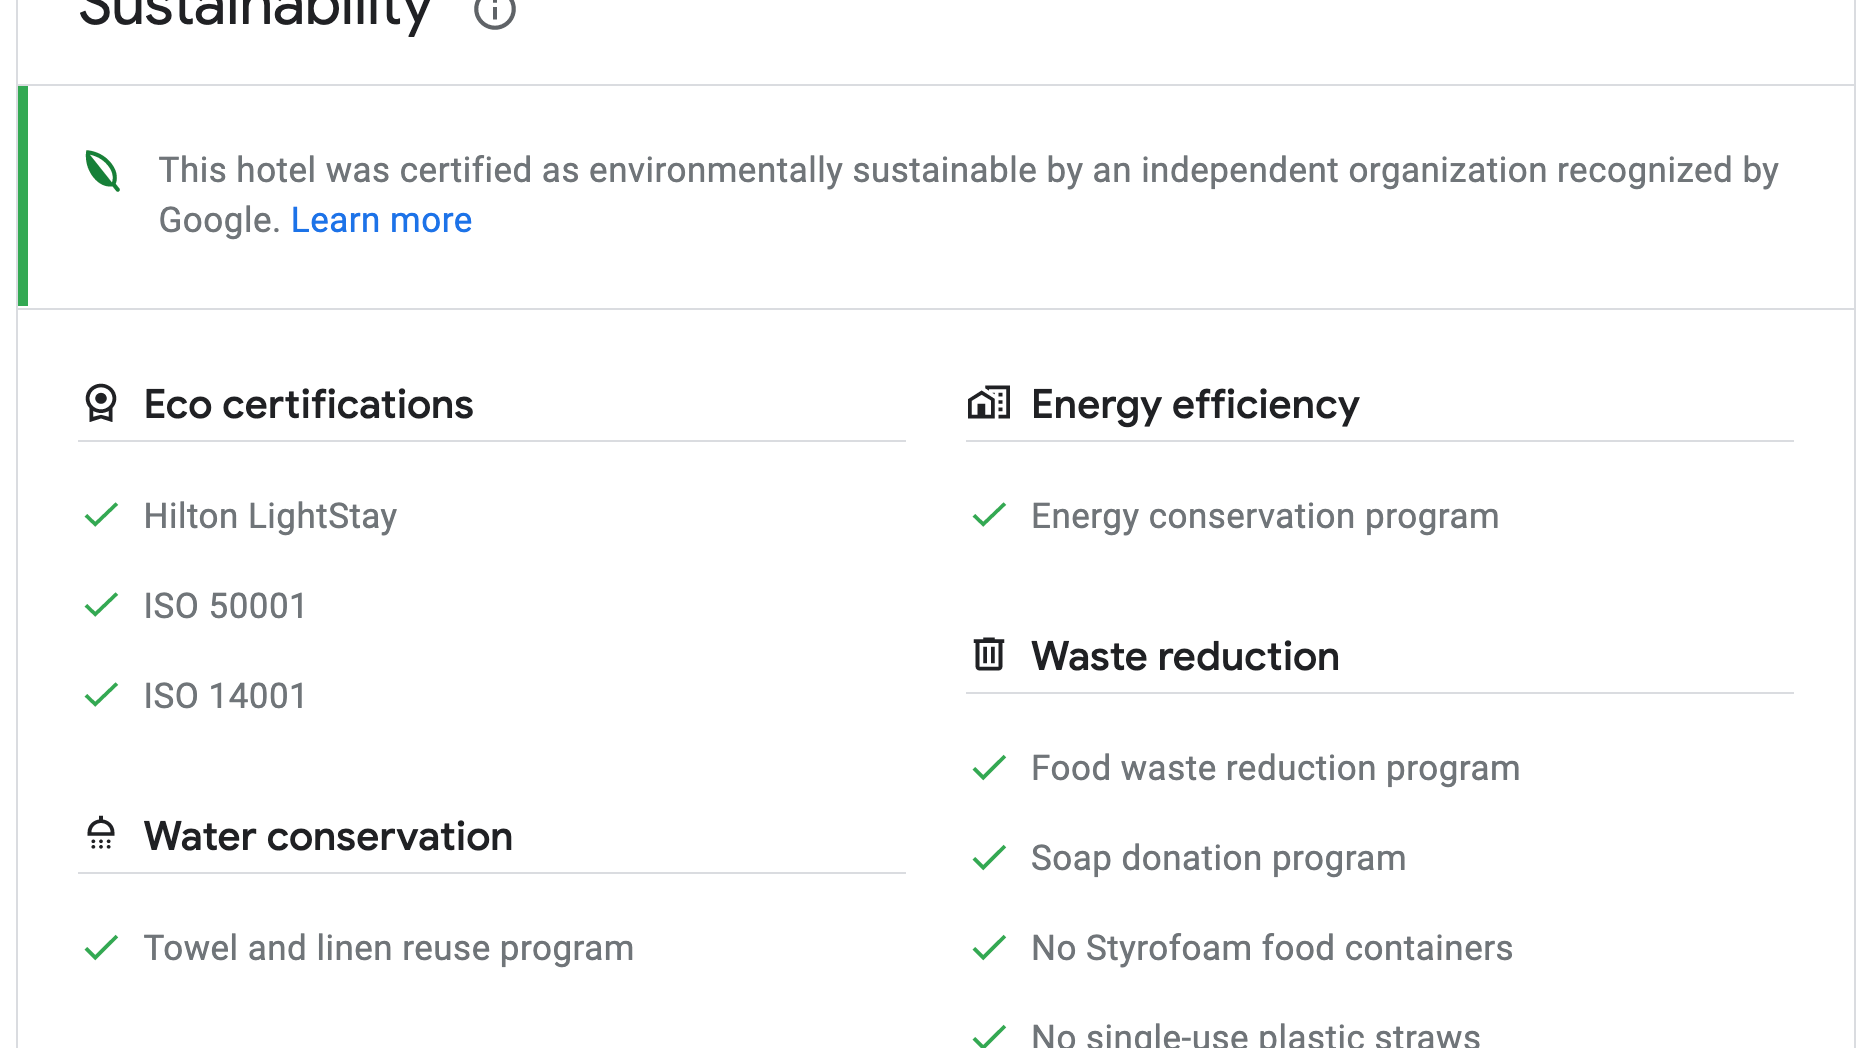 Hotels on Google now have a "Sustainability" section that describes their practices.